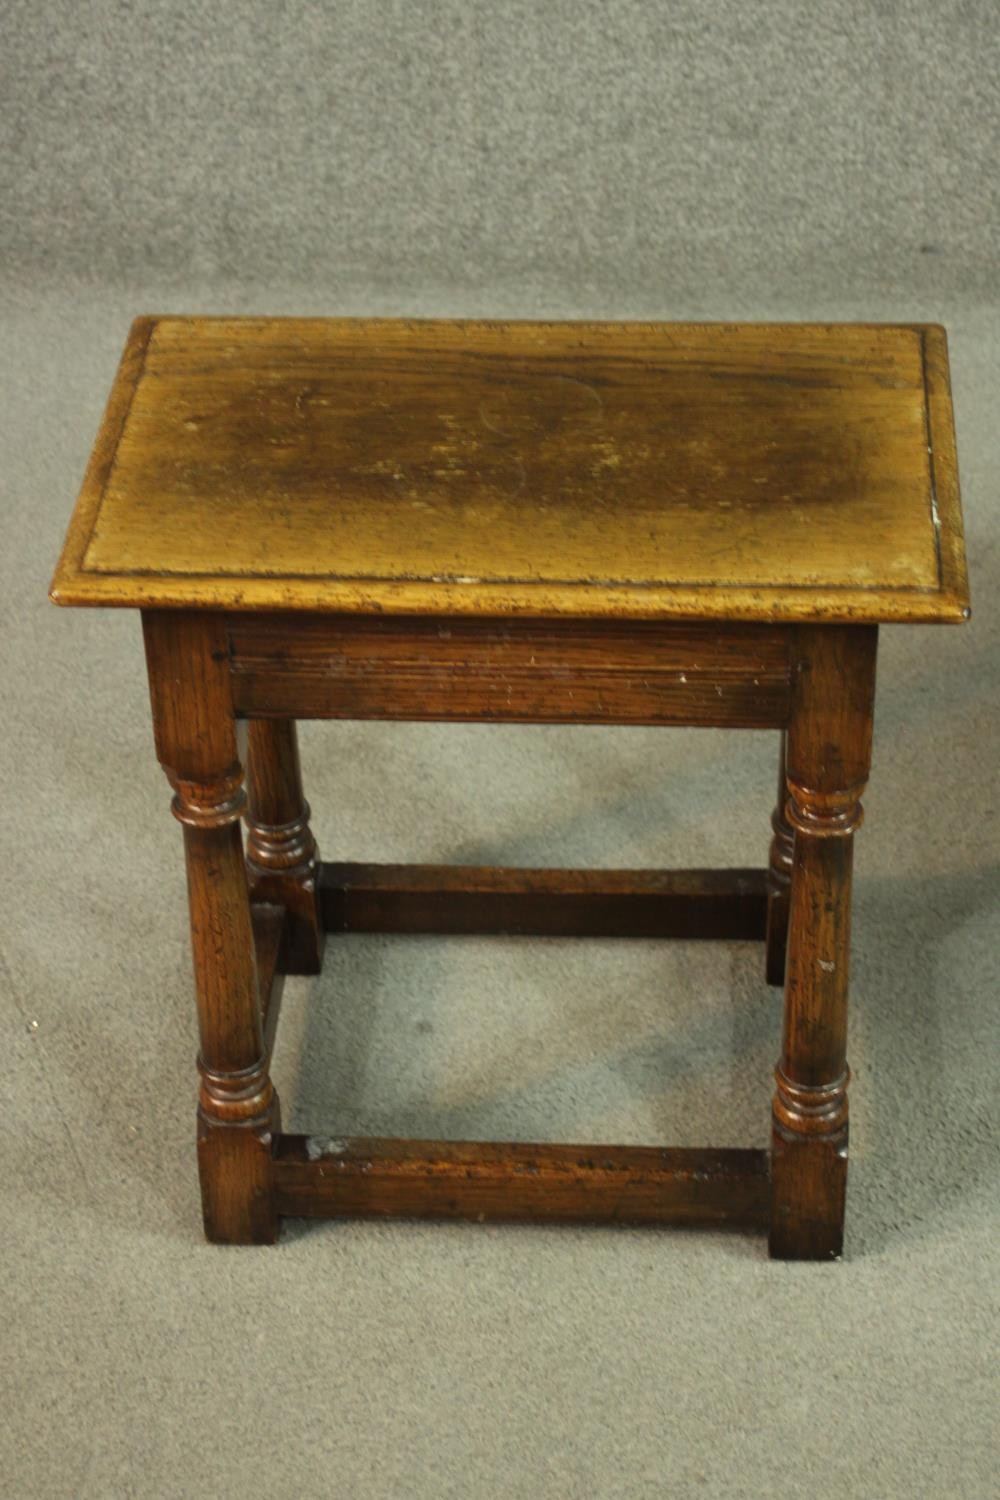 Two oak joint stools, 20th century, both rectangular, on turned legs with stretchers, one with a - Image 4 of 6